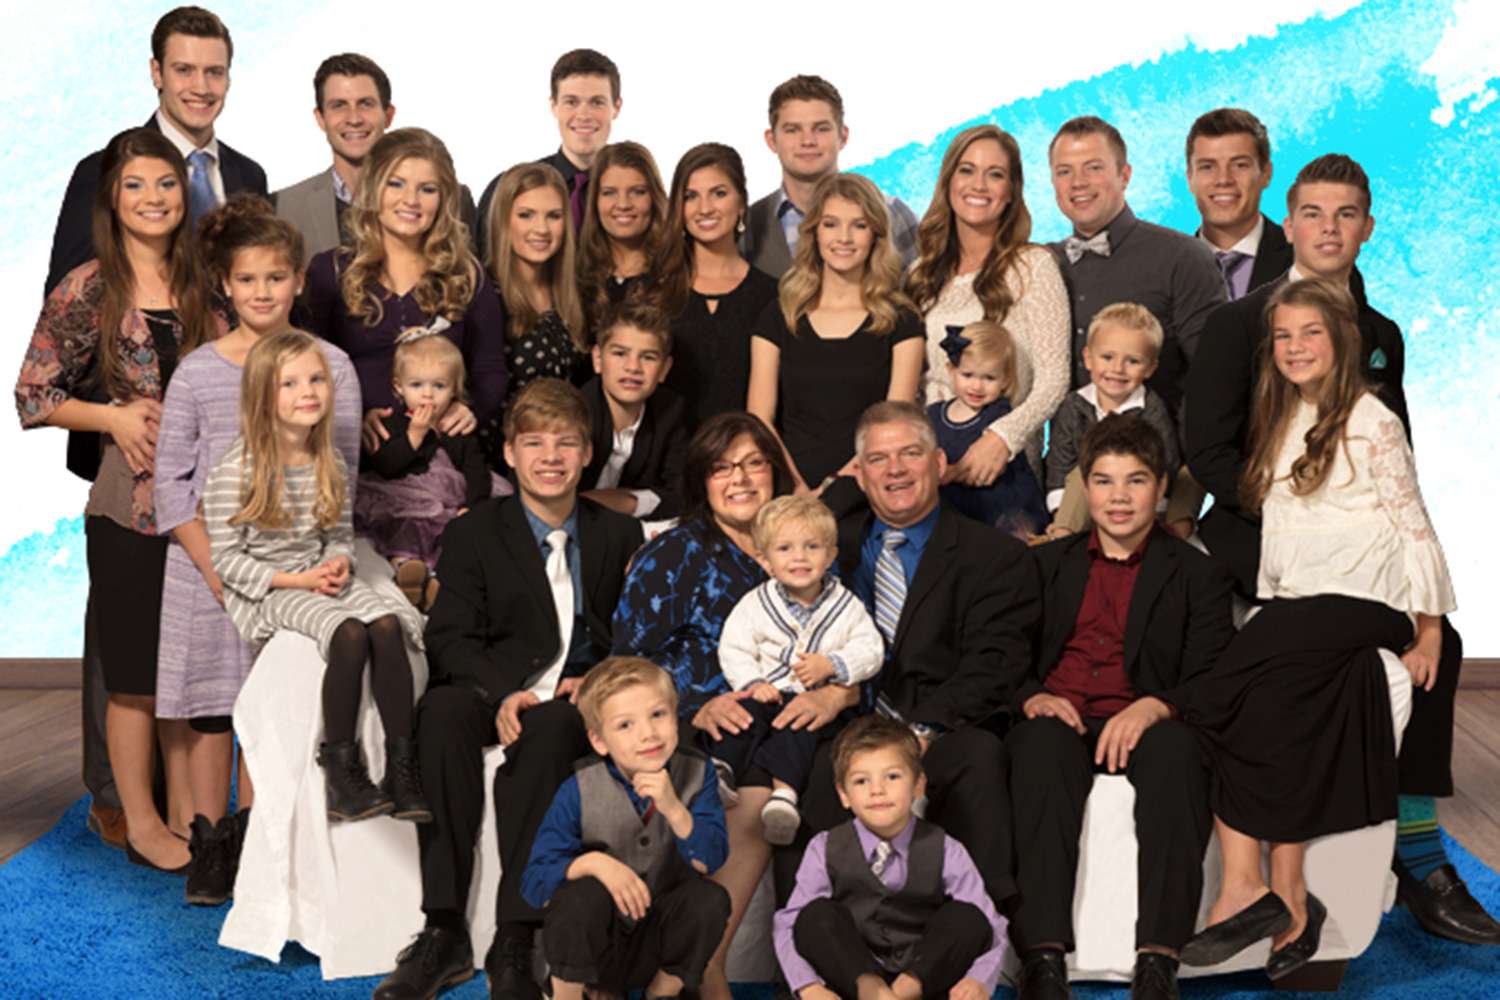 Bringing Up Bates Season 11 Will Not Air 'as Planned,' Network Announces - Yahoo Entertainment